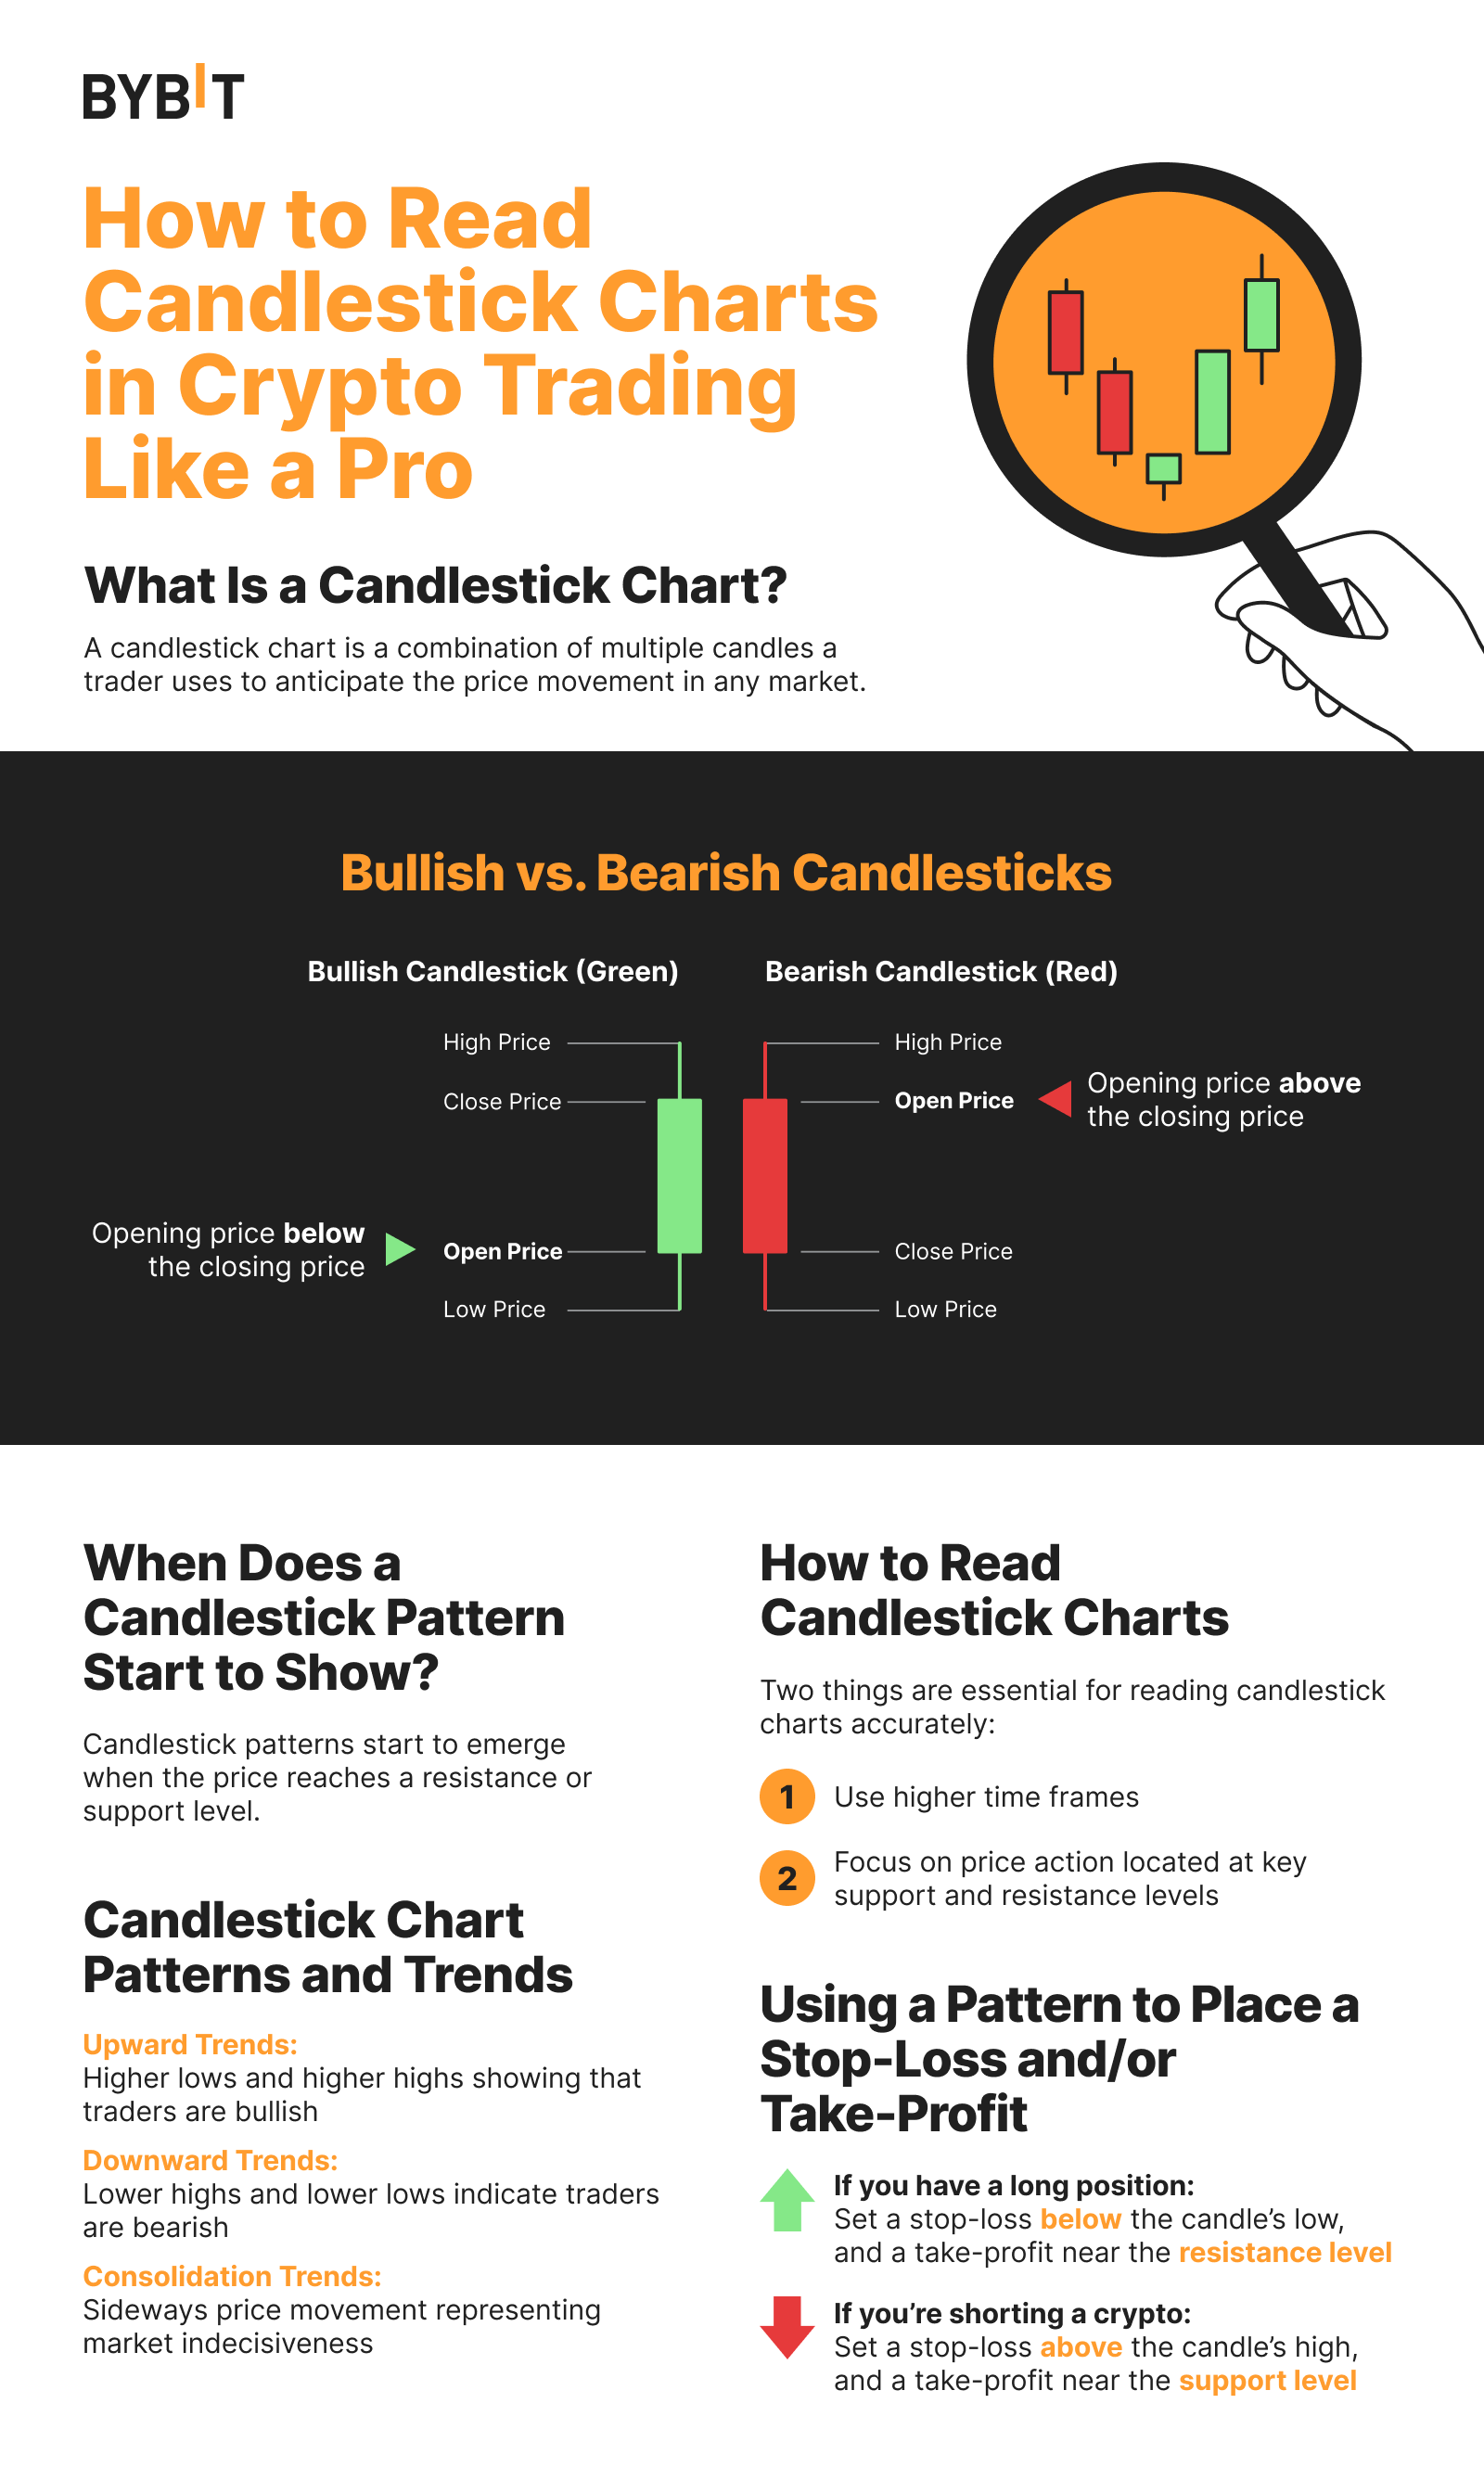 How to read candlestick charts in crypto trading like a pro.